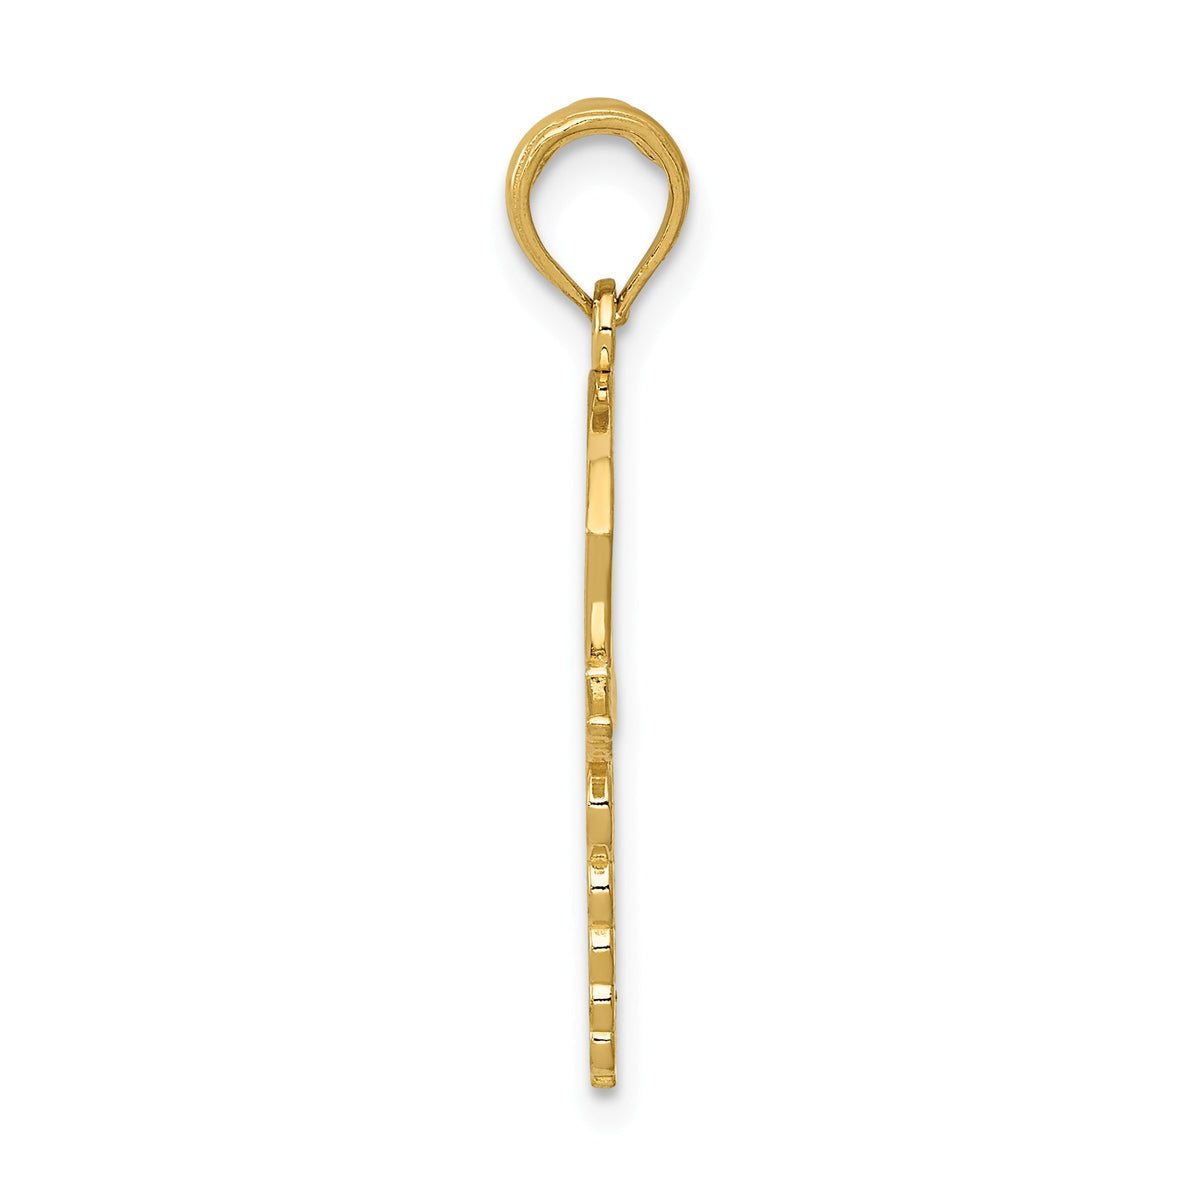 Alternate view of the 14k Yellow Gold Medical Caduceus with Nurses Cap Pendant by The Black Bow Jewelry Co.